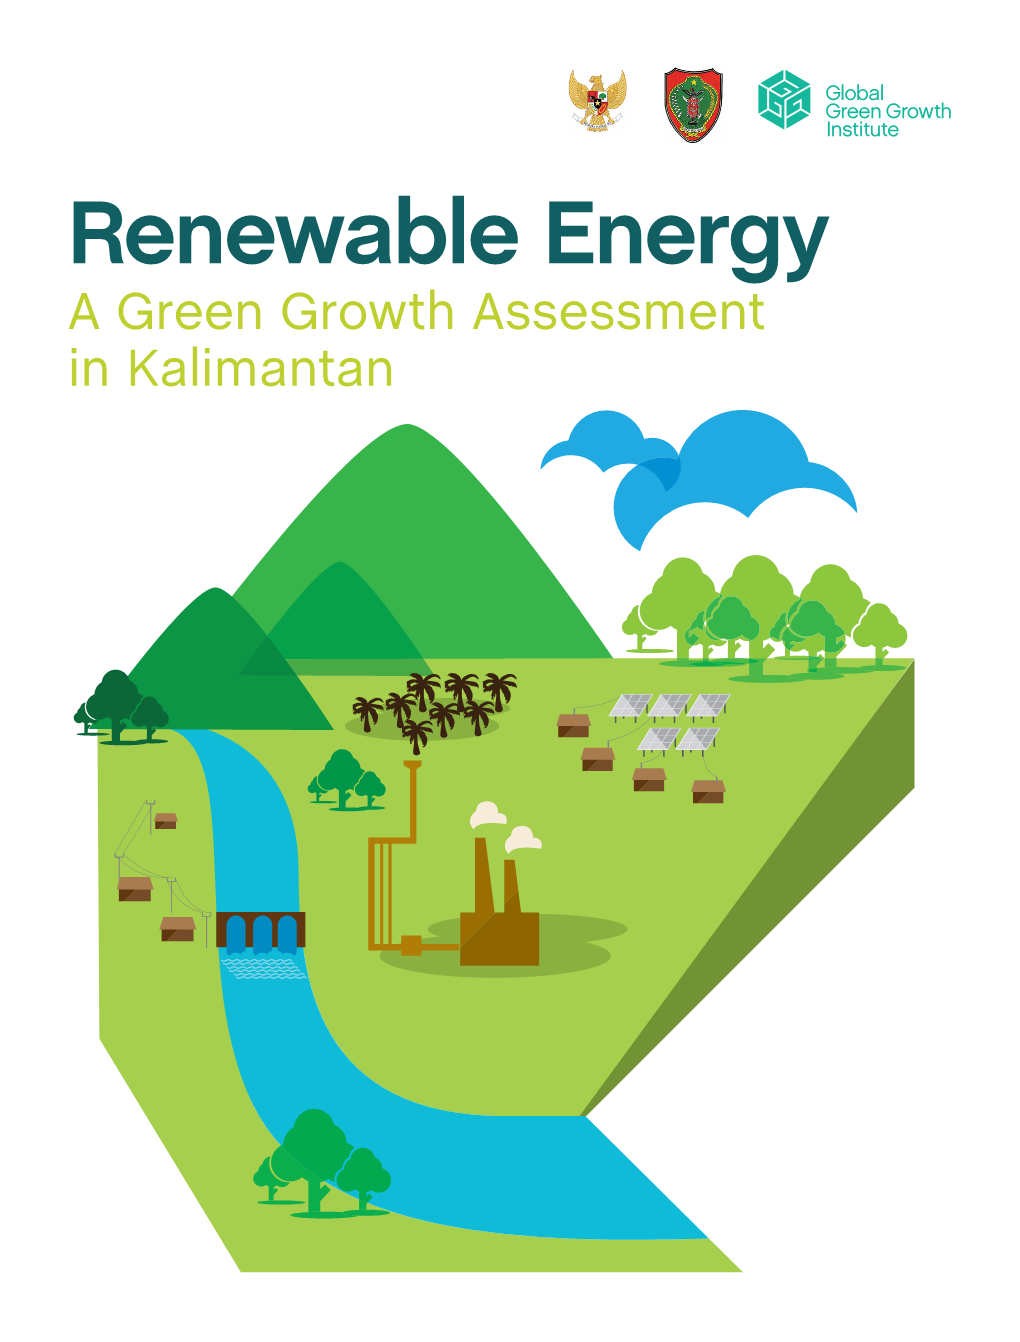 Renewable Energy a Green Growth Assessment in Kalimantan Published in March 2015